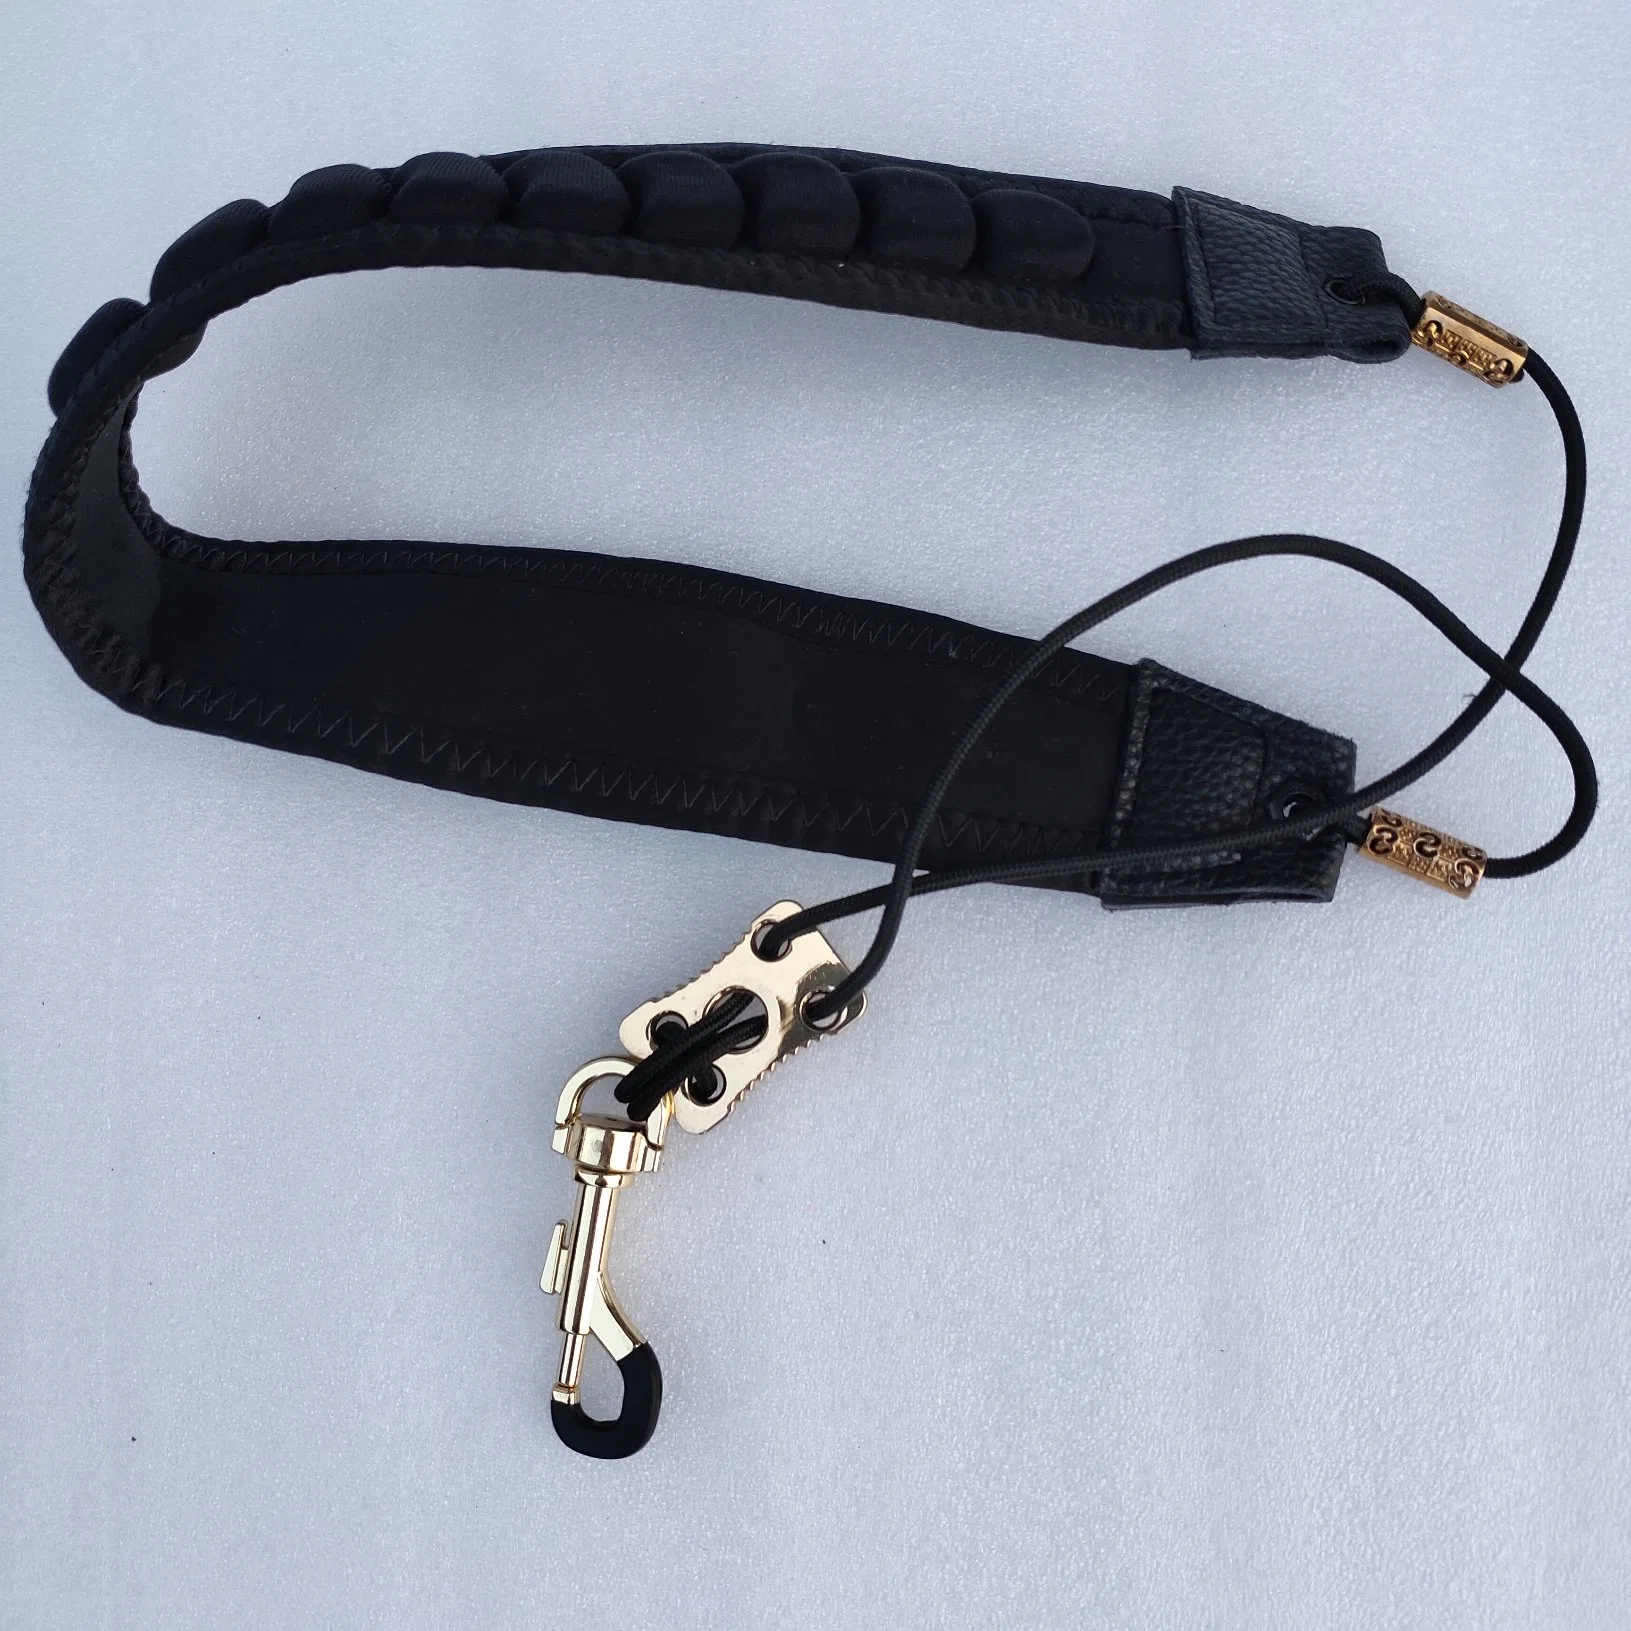 Wholesale/Supplier Accessories for Sax, Leather Straps